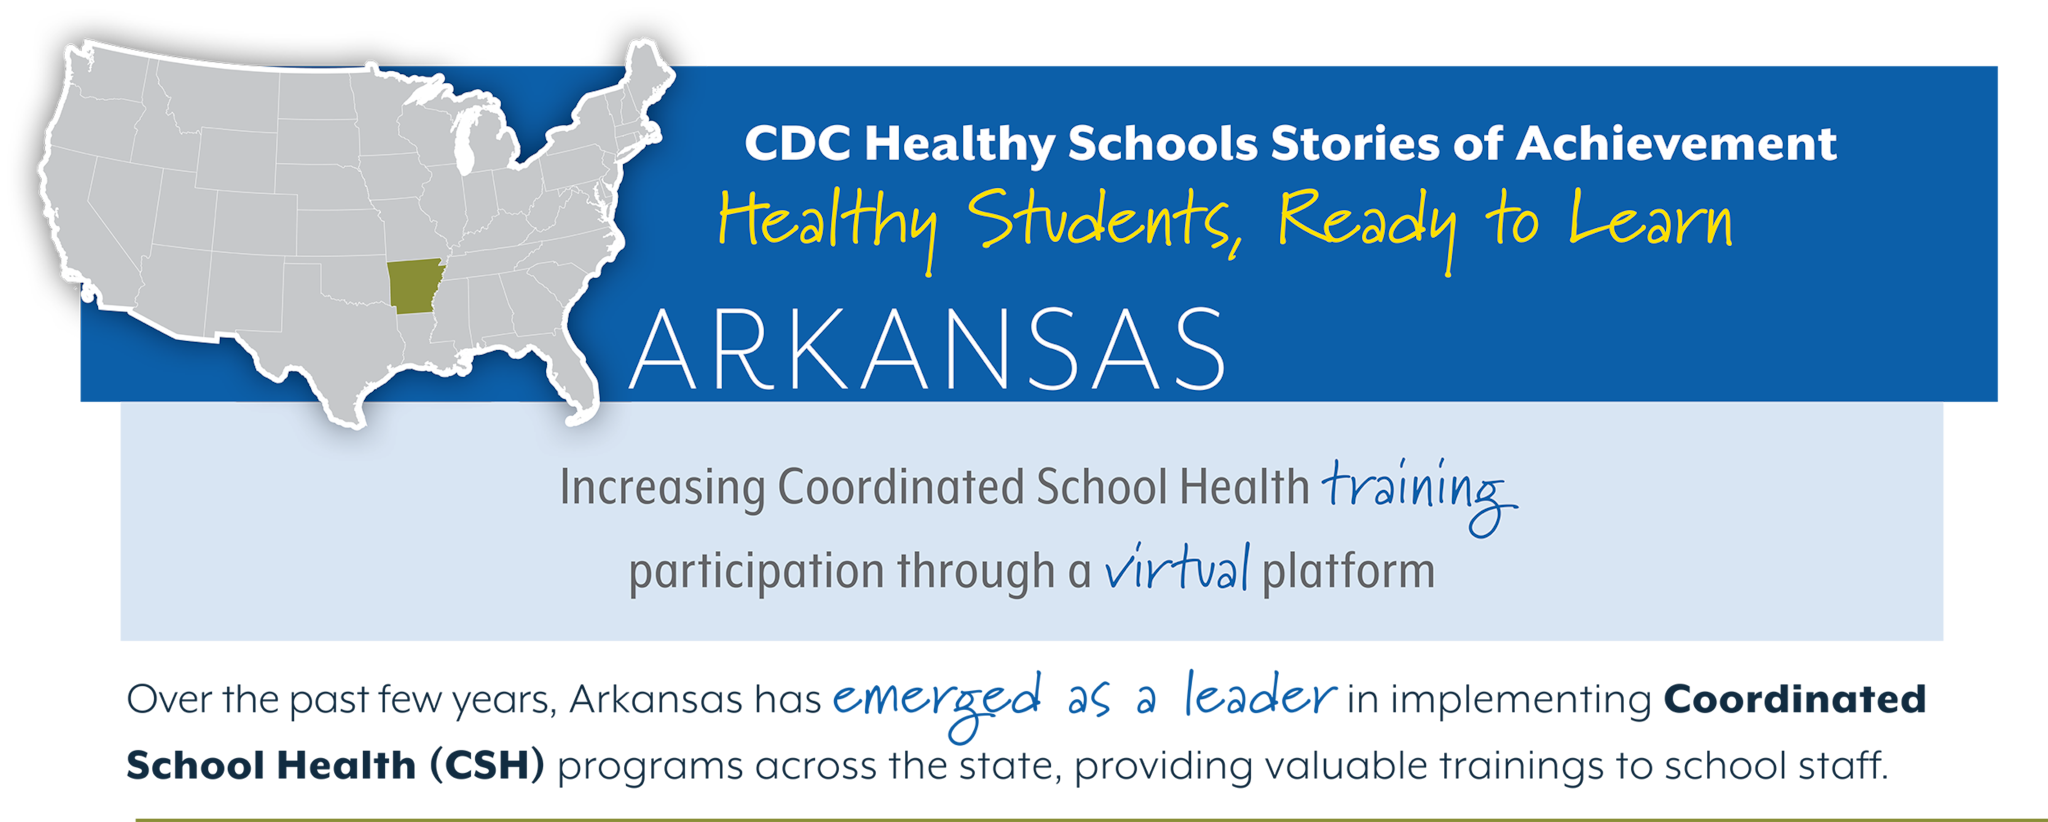 CDC Healthy Schools Stories of Achievement Arkansas Healthy Students , Ready to Learn Increasing Coordinated School Health training participation through a virtual platform. Over the past few years, Arkansas has emerged as a leader in implementing Coordinated School Health (CSH) programs across the state, providing valuable trainings to school staff